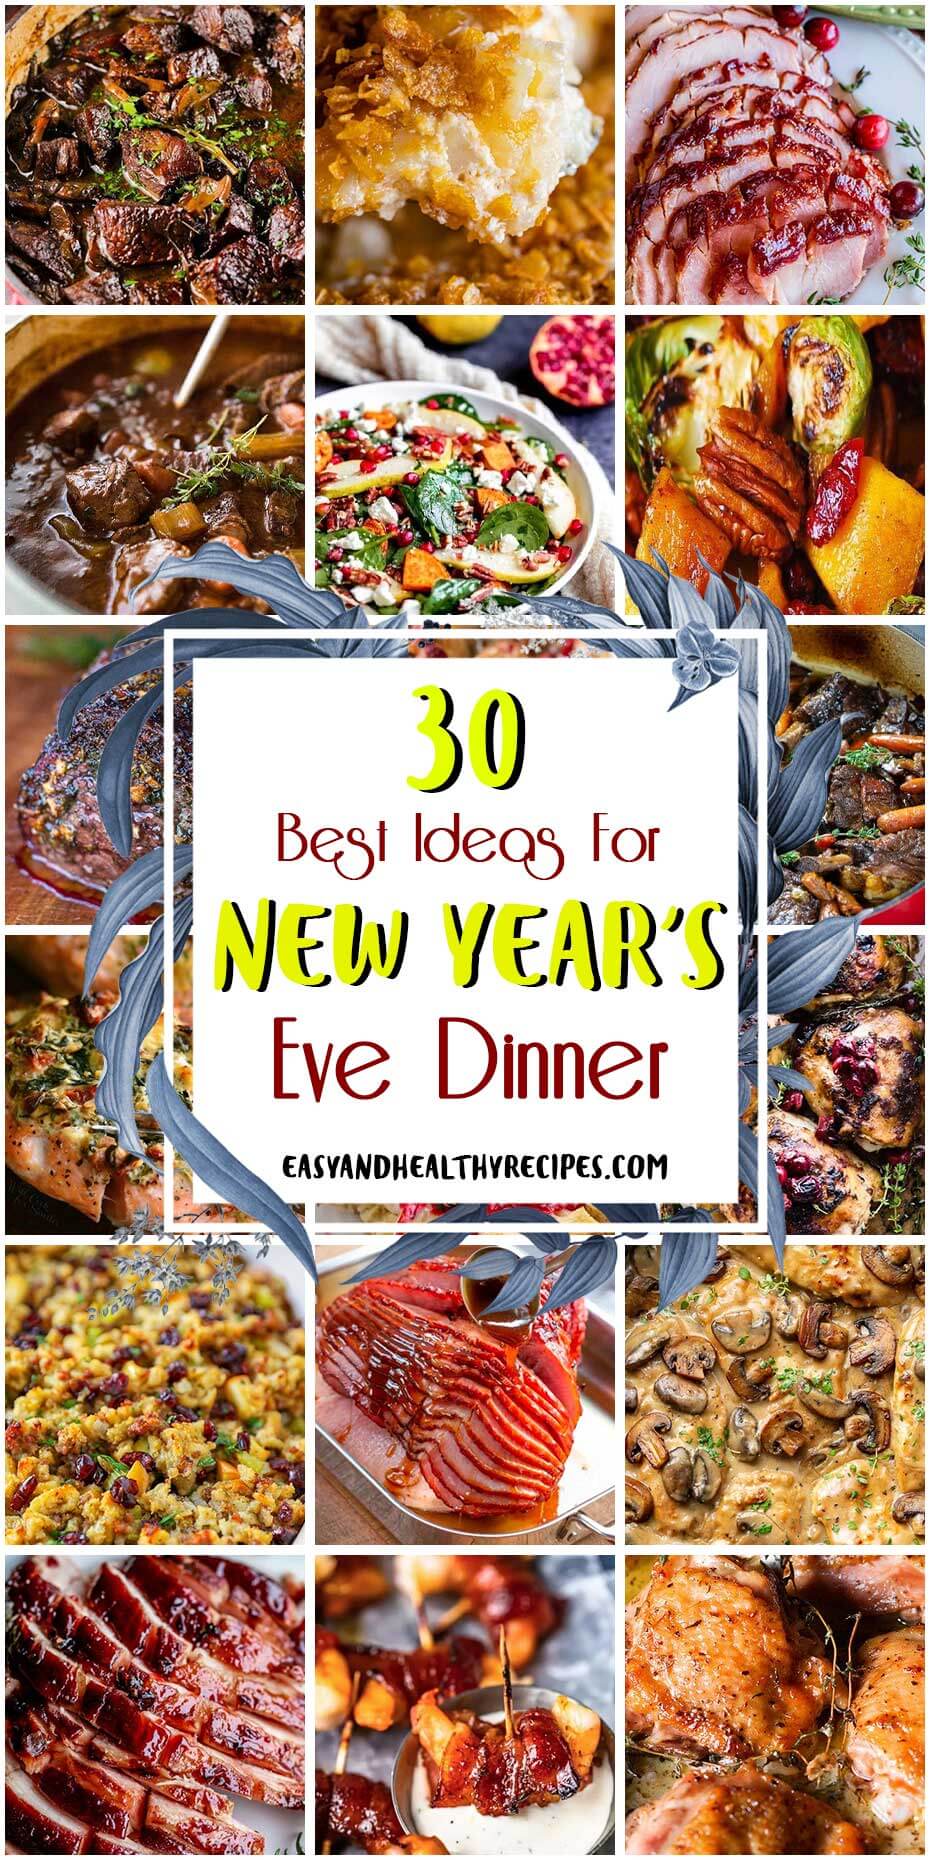 30 Best Ideas For New Year’s Eve Dinner